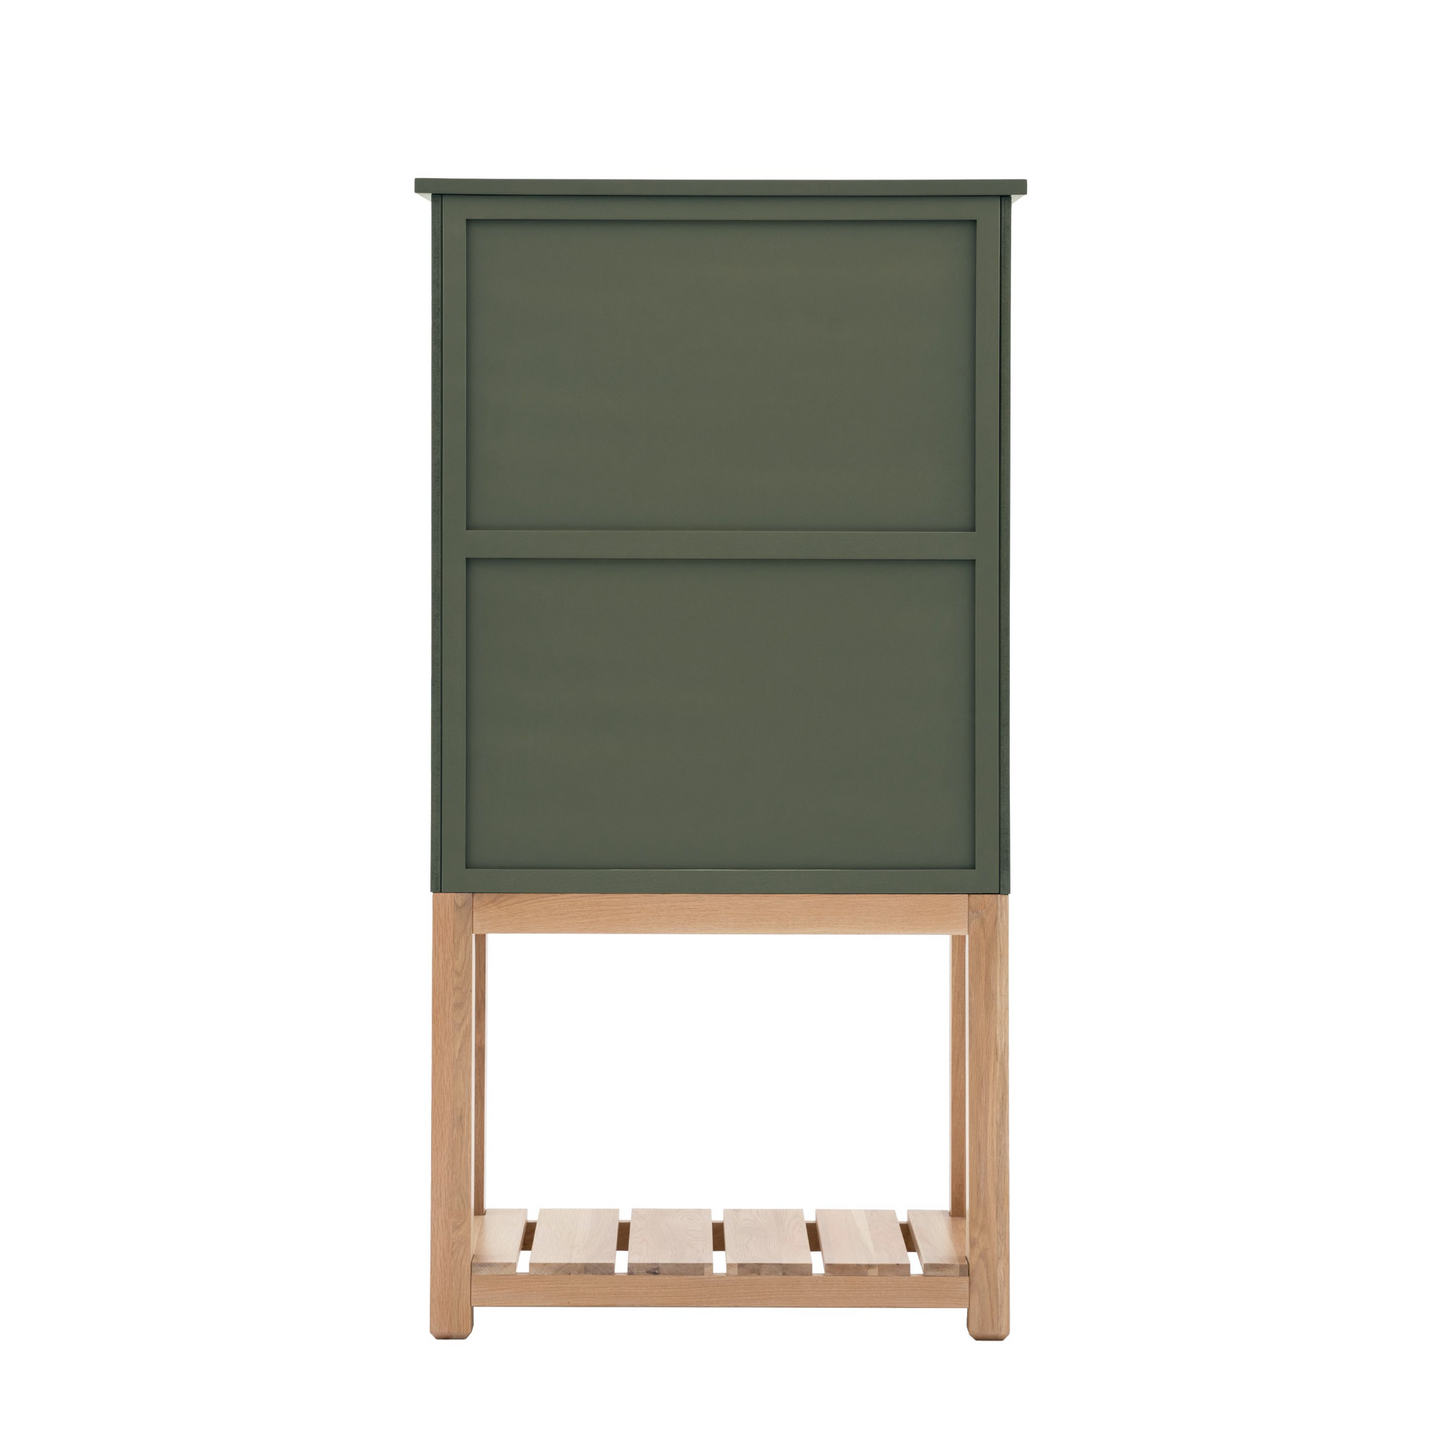 A Buckland 2 Door Storage Cupboard in Moss on a wooden stand, perfect for interior decor from Kikiathome.co.uk.